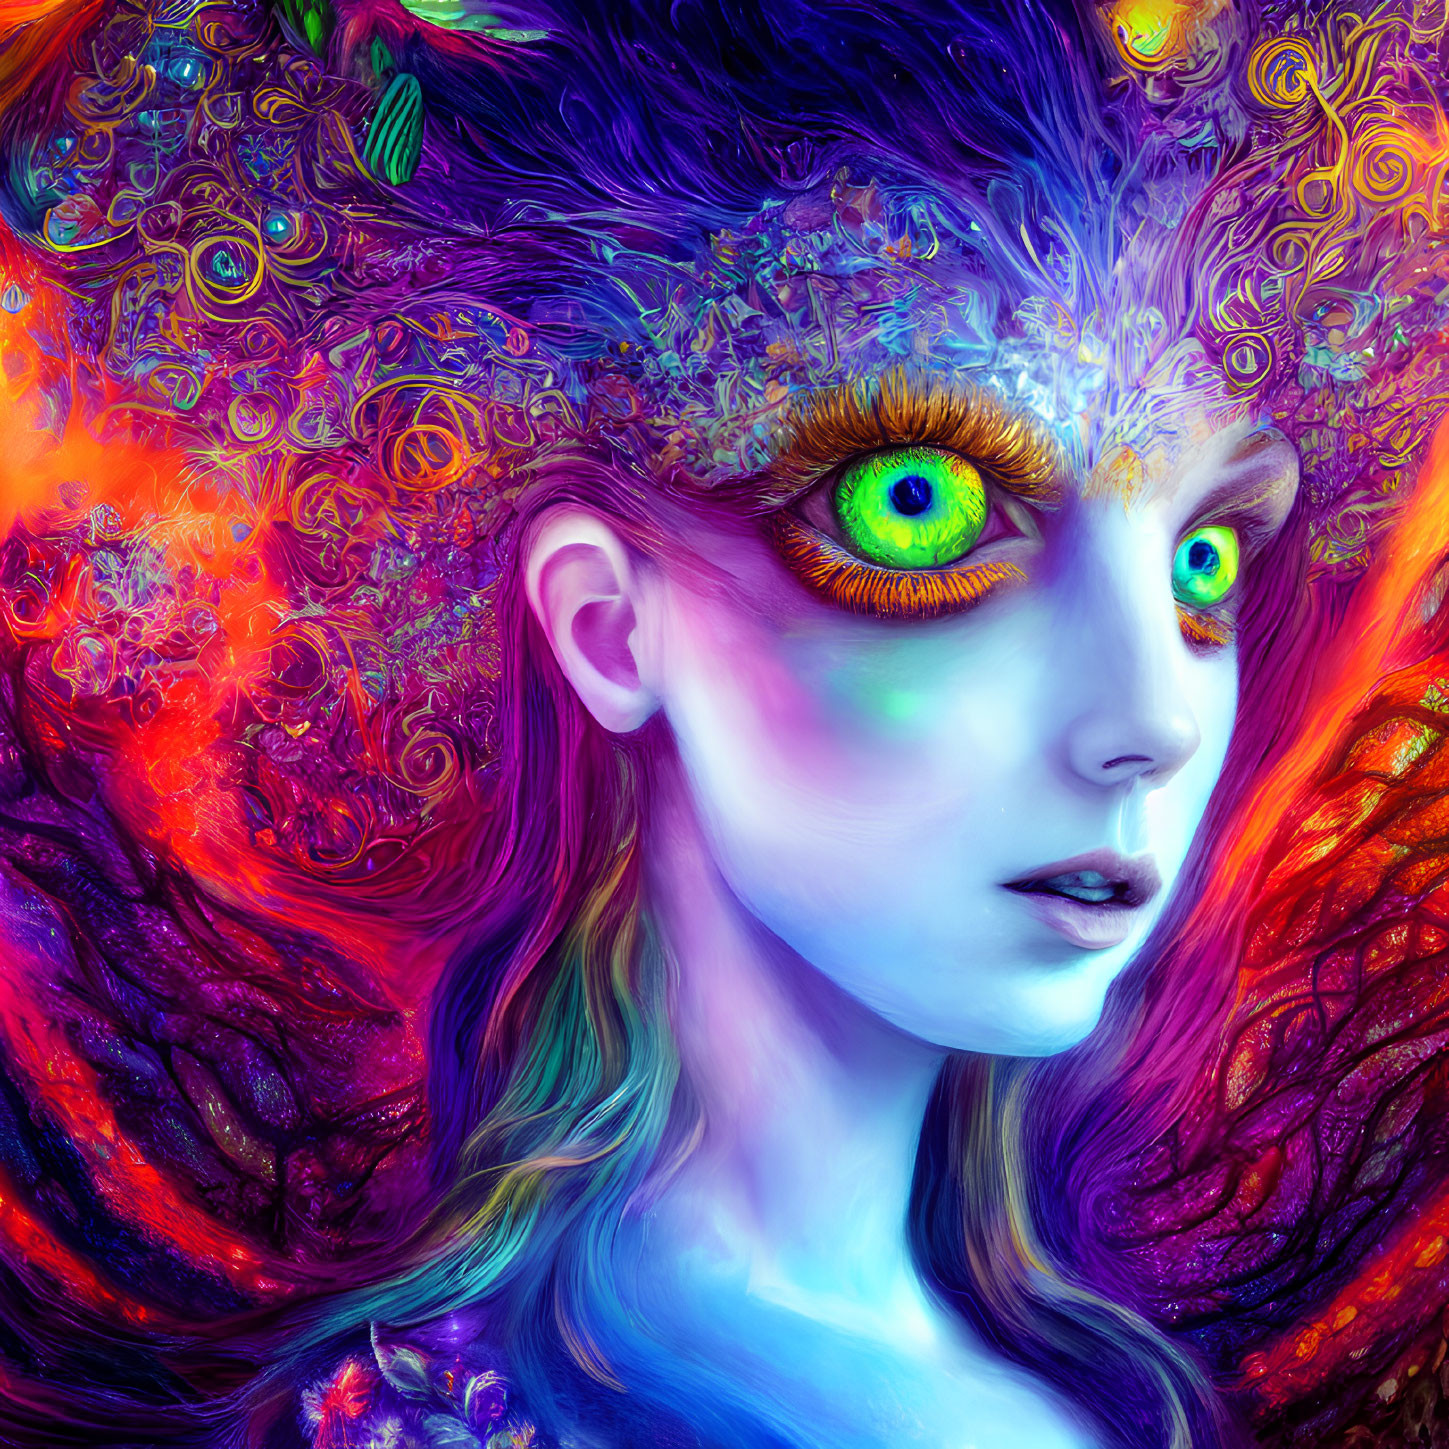 Colorful digital art: Female figure with elaborate headdress and green eyes on fiery background